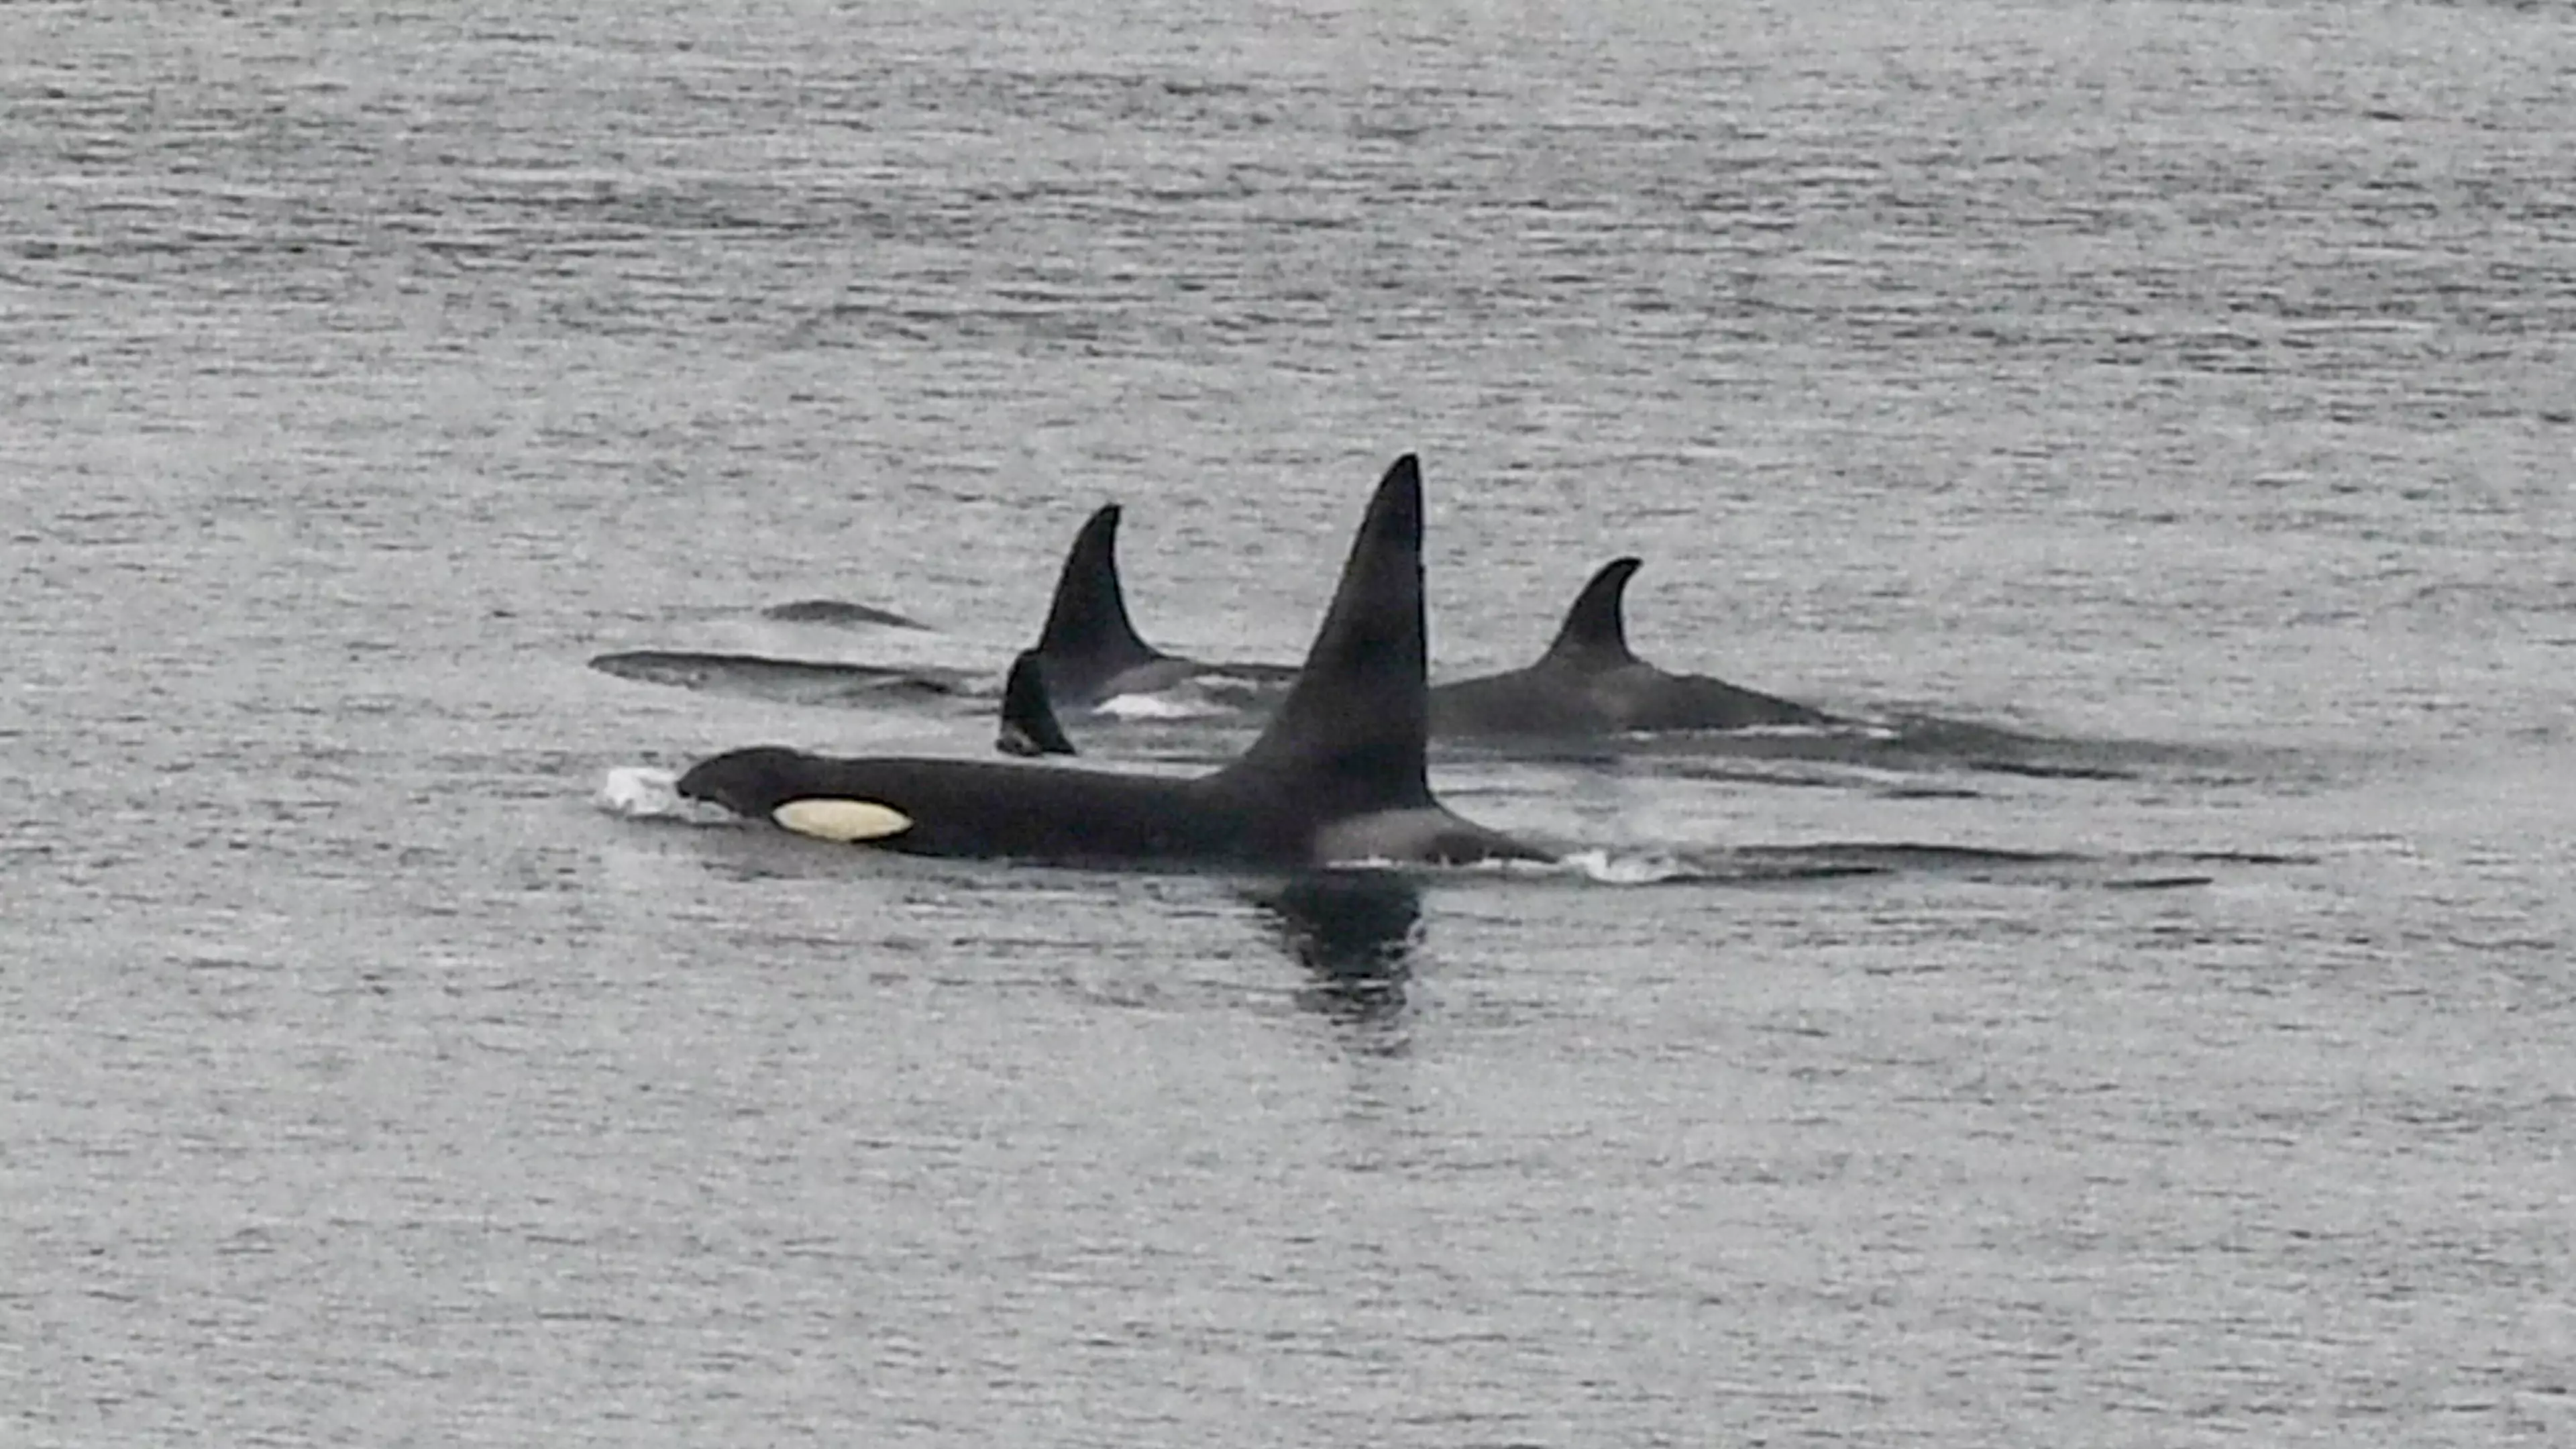 Scientists 'Concerned' After Killer Whales Attack Boats Off The Spanish Coast